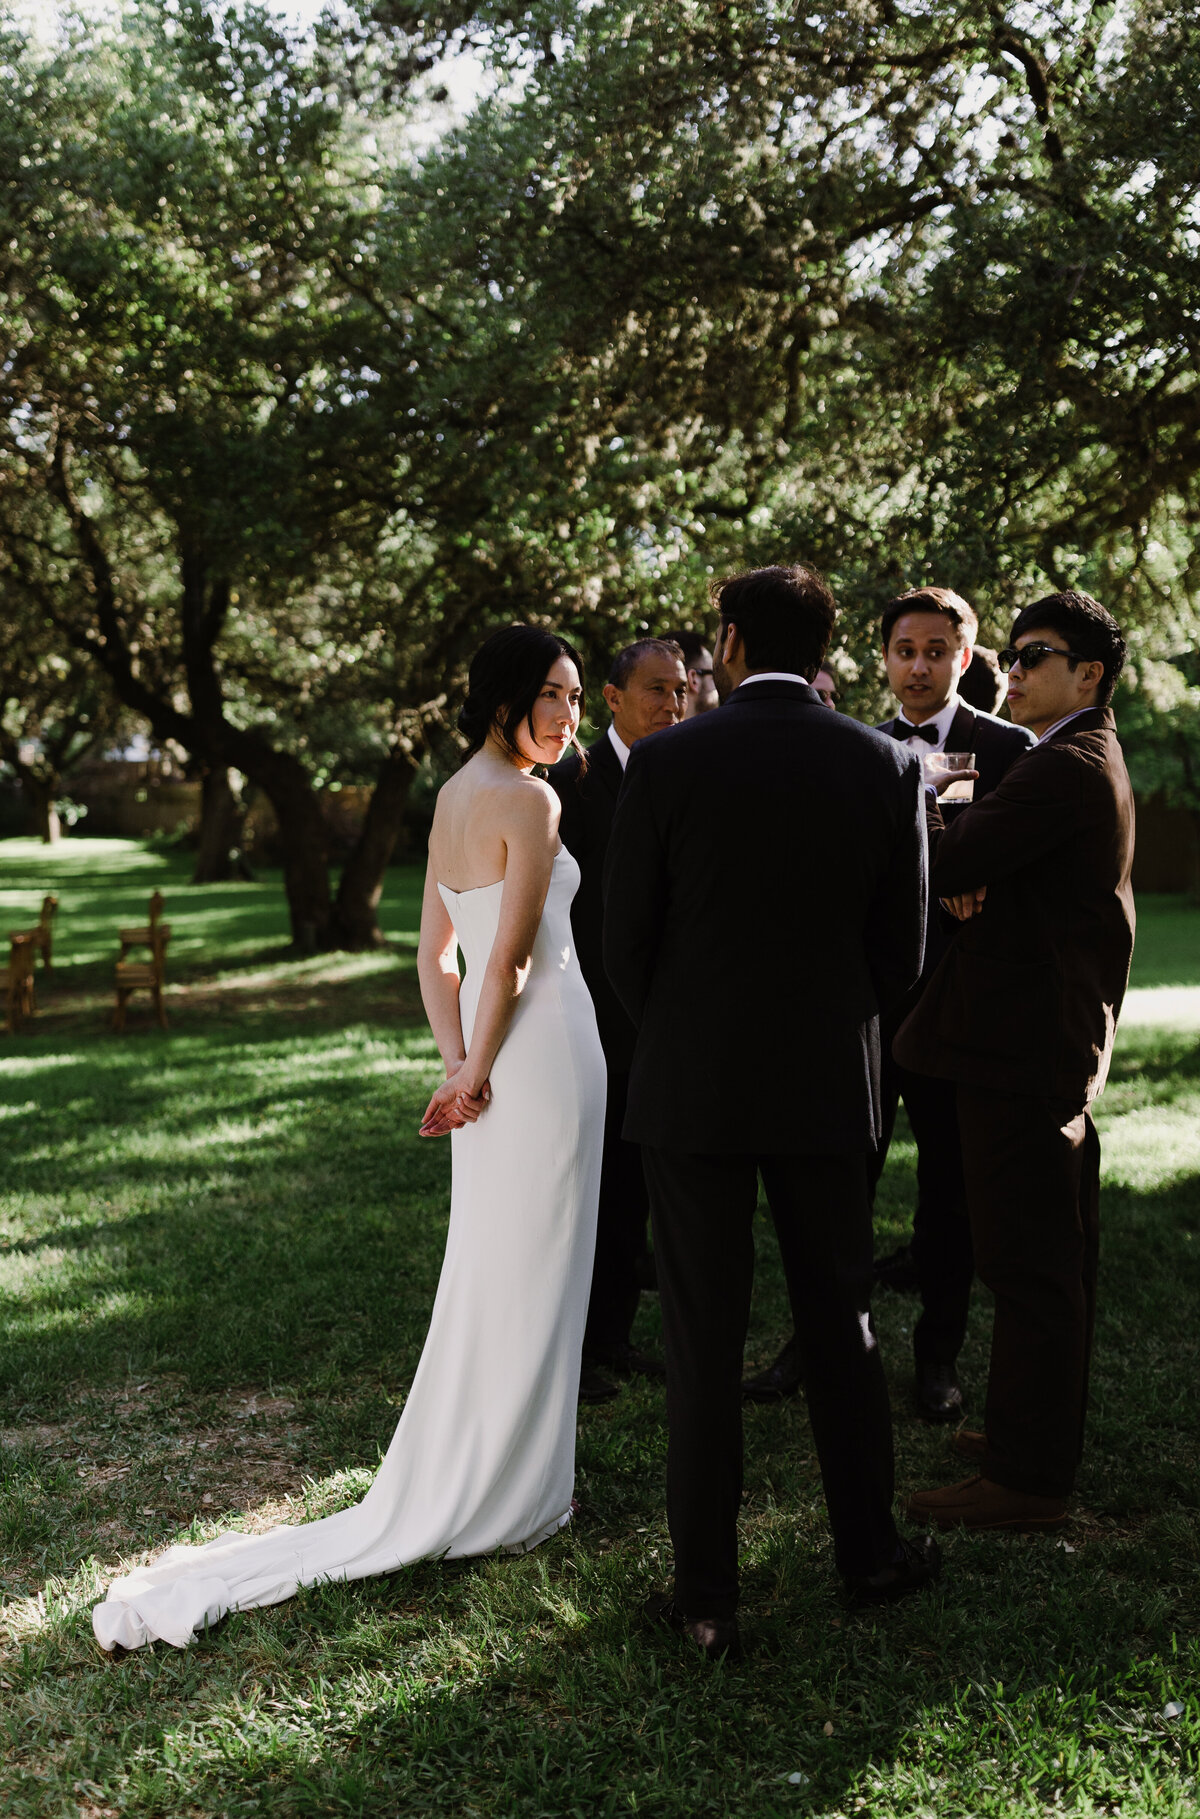 Bride and groom chatting with guests at outdoor wedding at Mattie's wedding venue in Austin